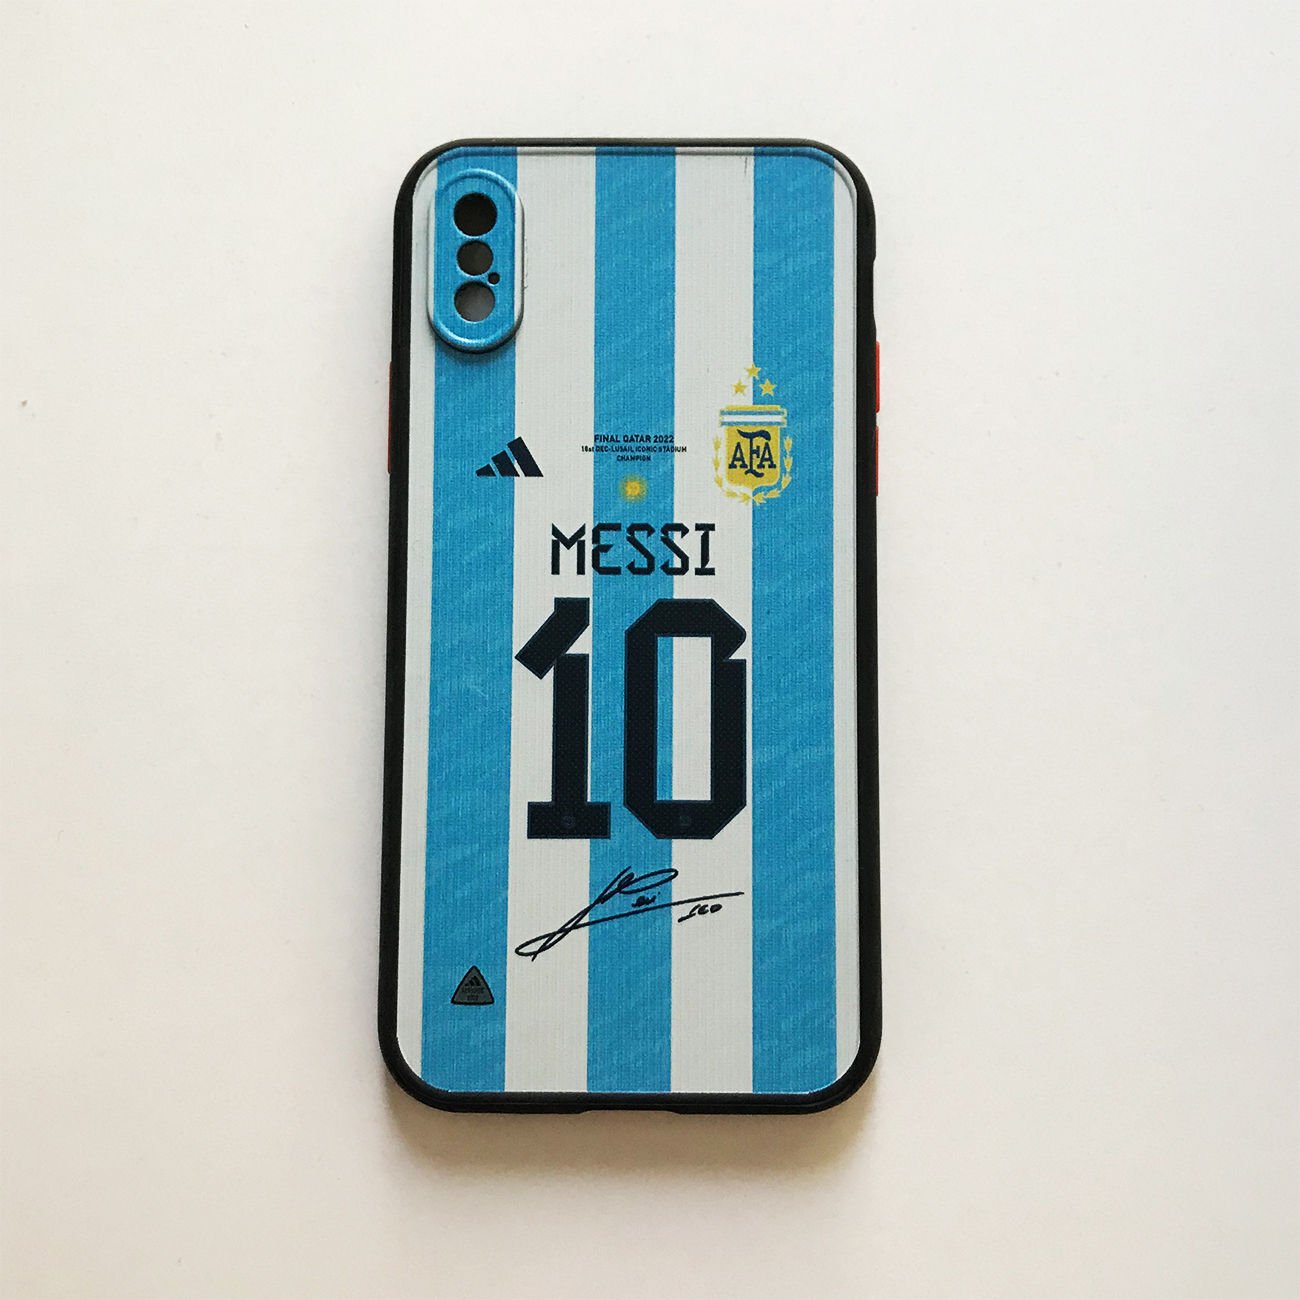 OUTLET - Argentina World Cup Qatar: Messi 10 - iPhone X / XS